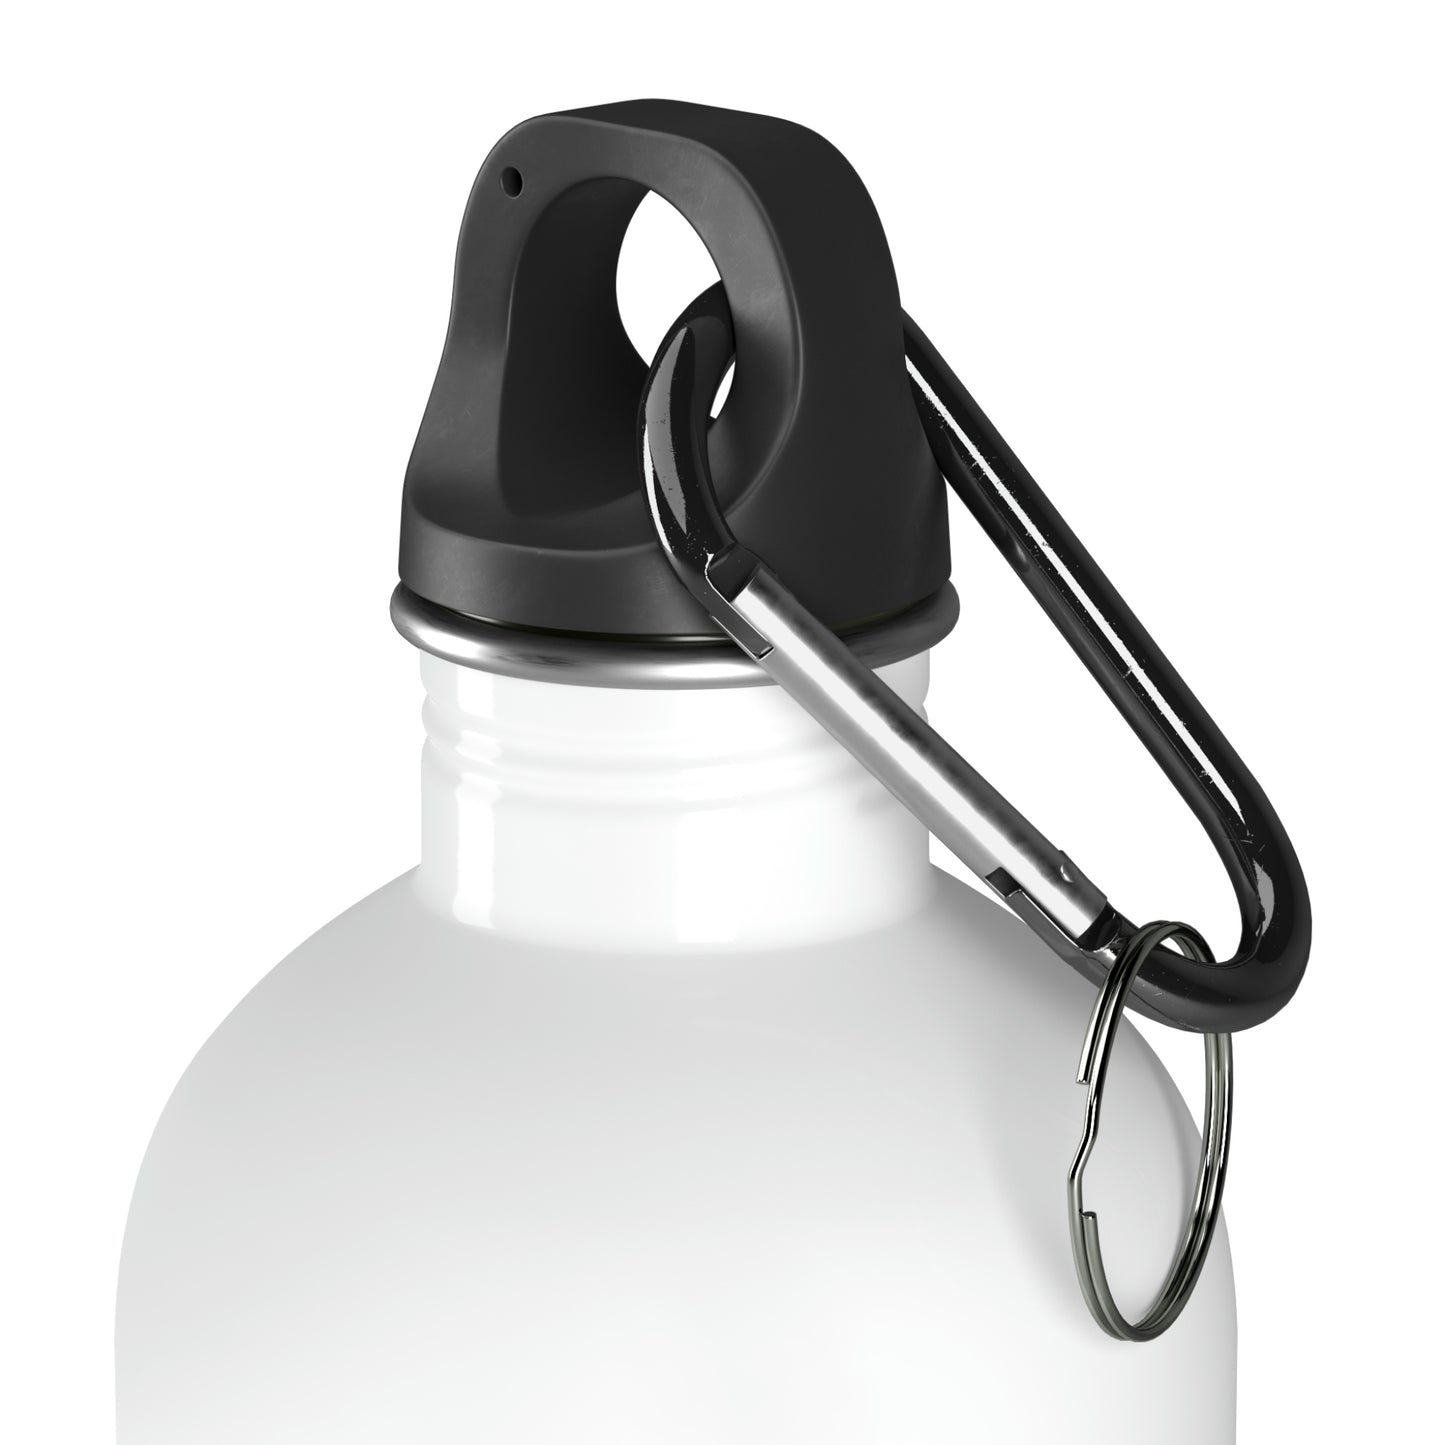 "A Cup of Comfort" - The Alien Stainless Steel Water Bottle